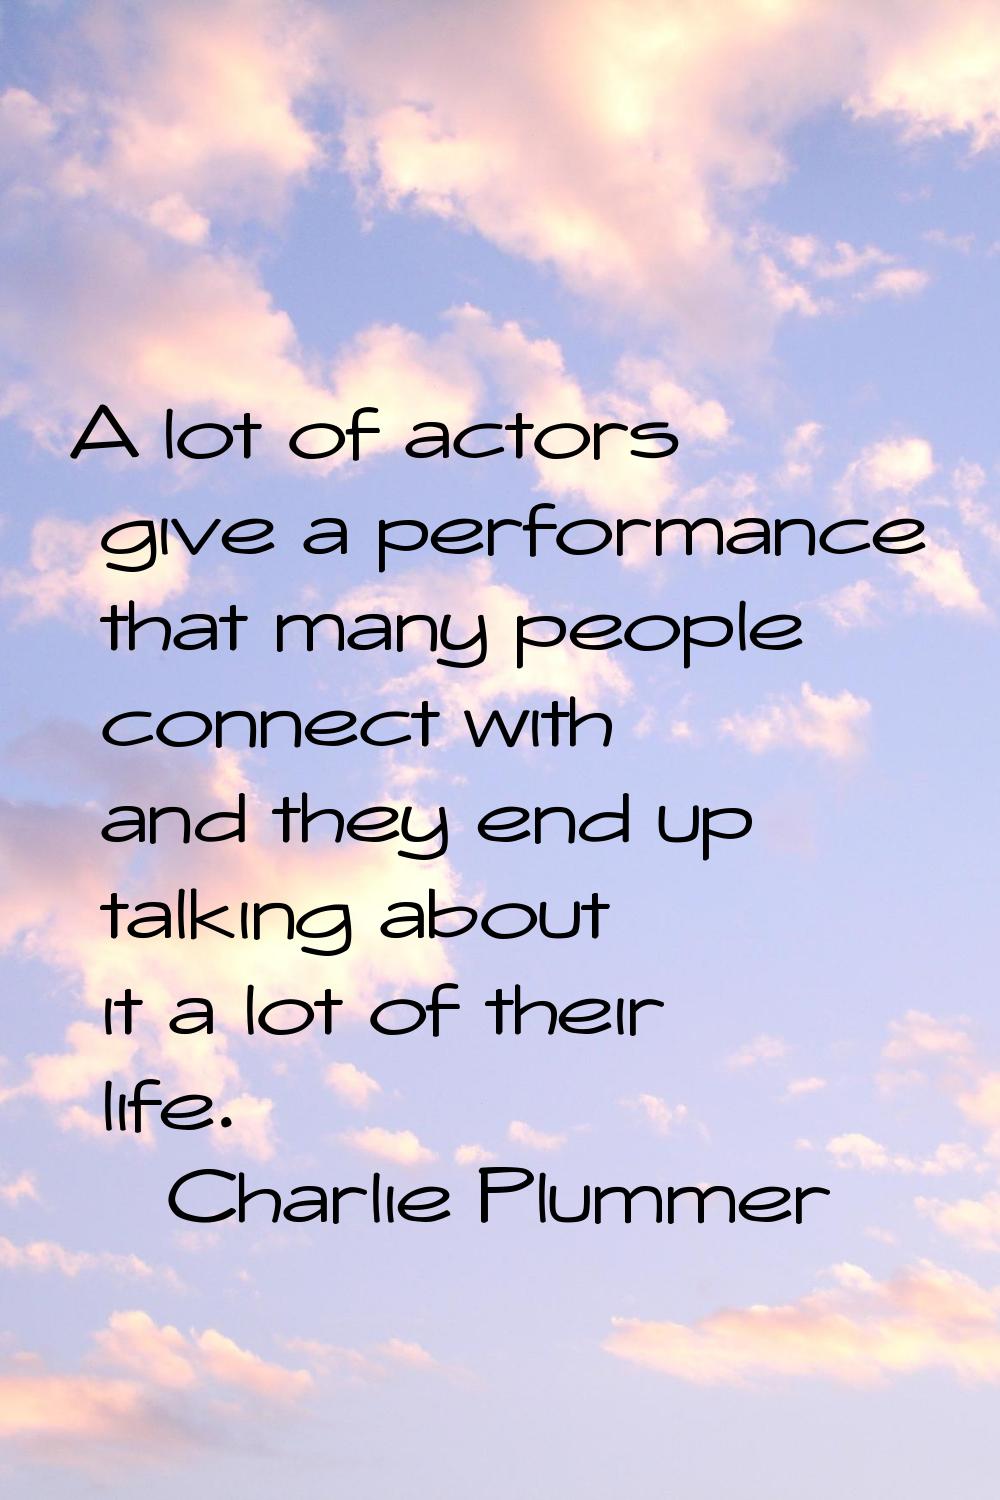 A lot of actors give a performance that many people connect with and they end up talking about it a